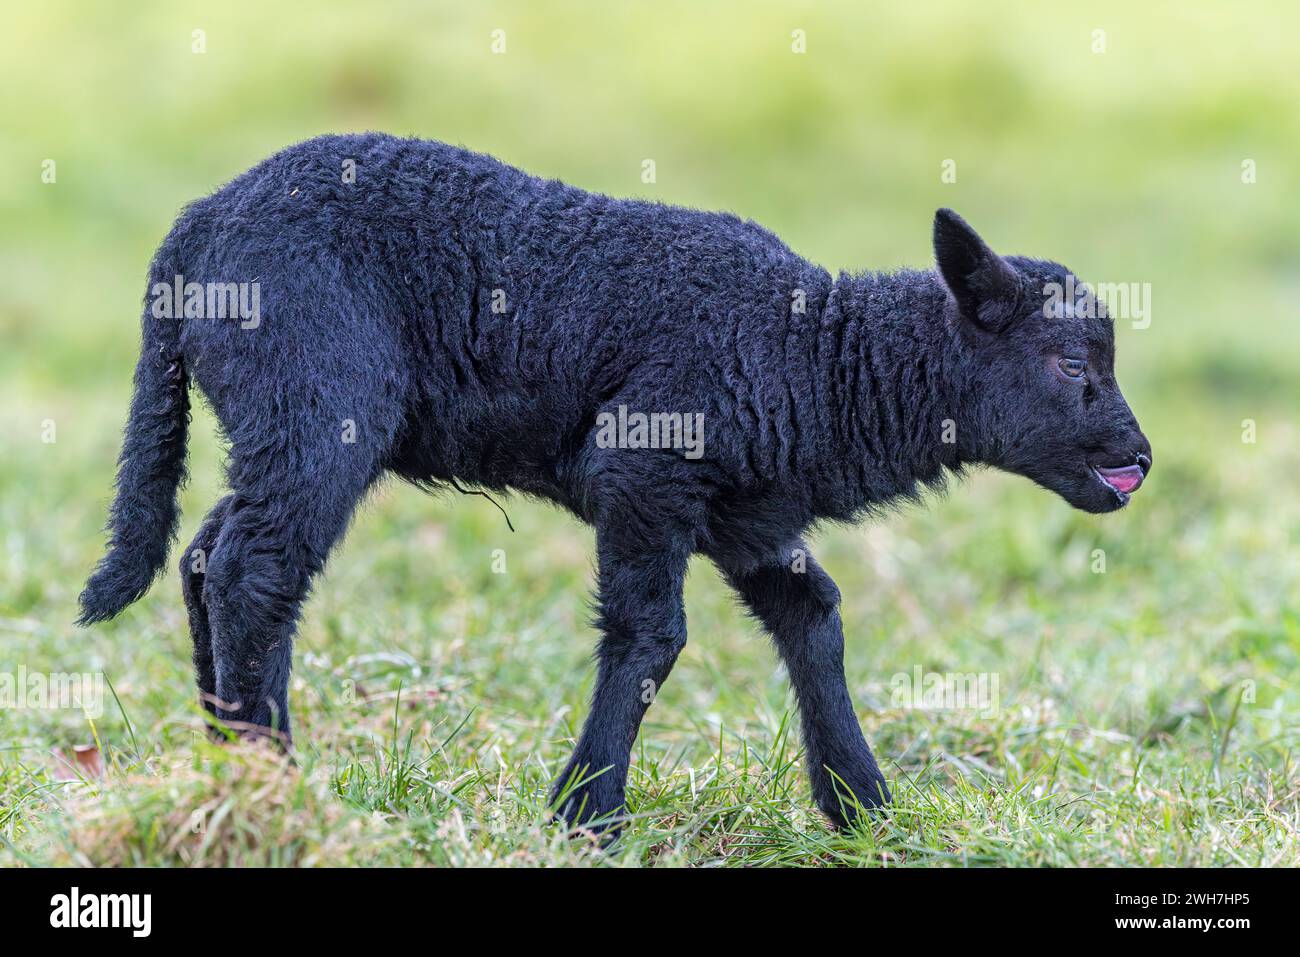 Adorable Black Lamb with Tongue Out, side Profile Stock Photo